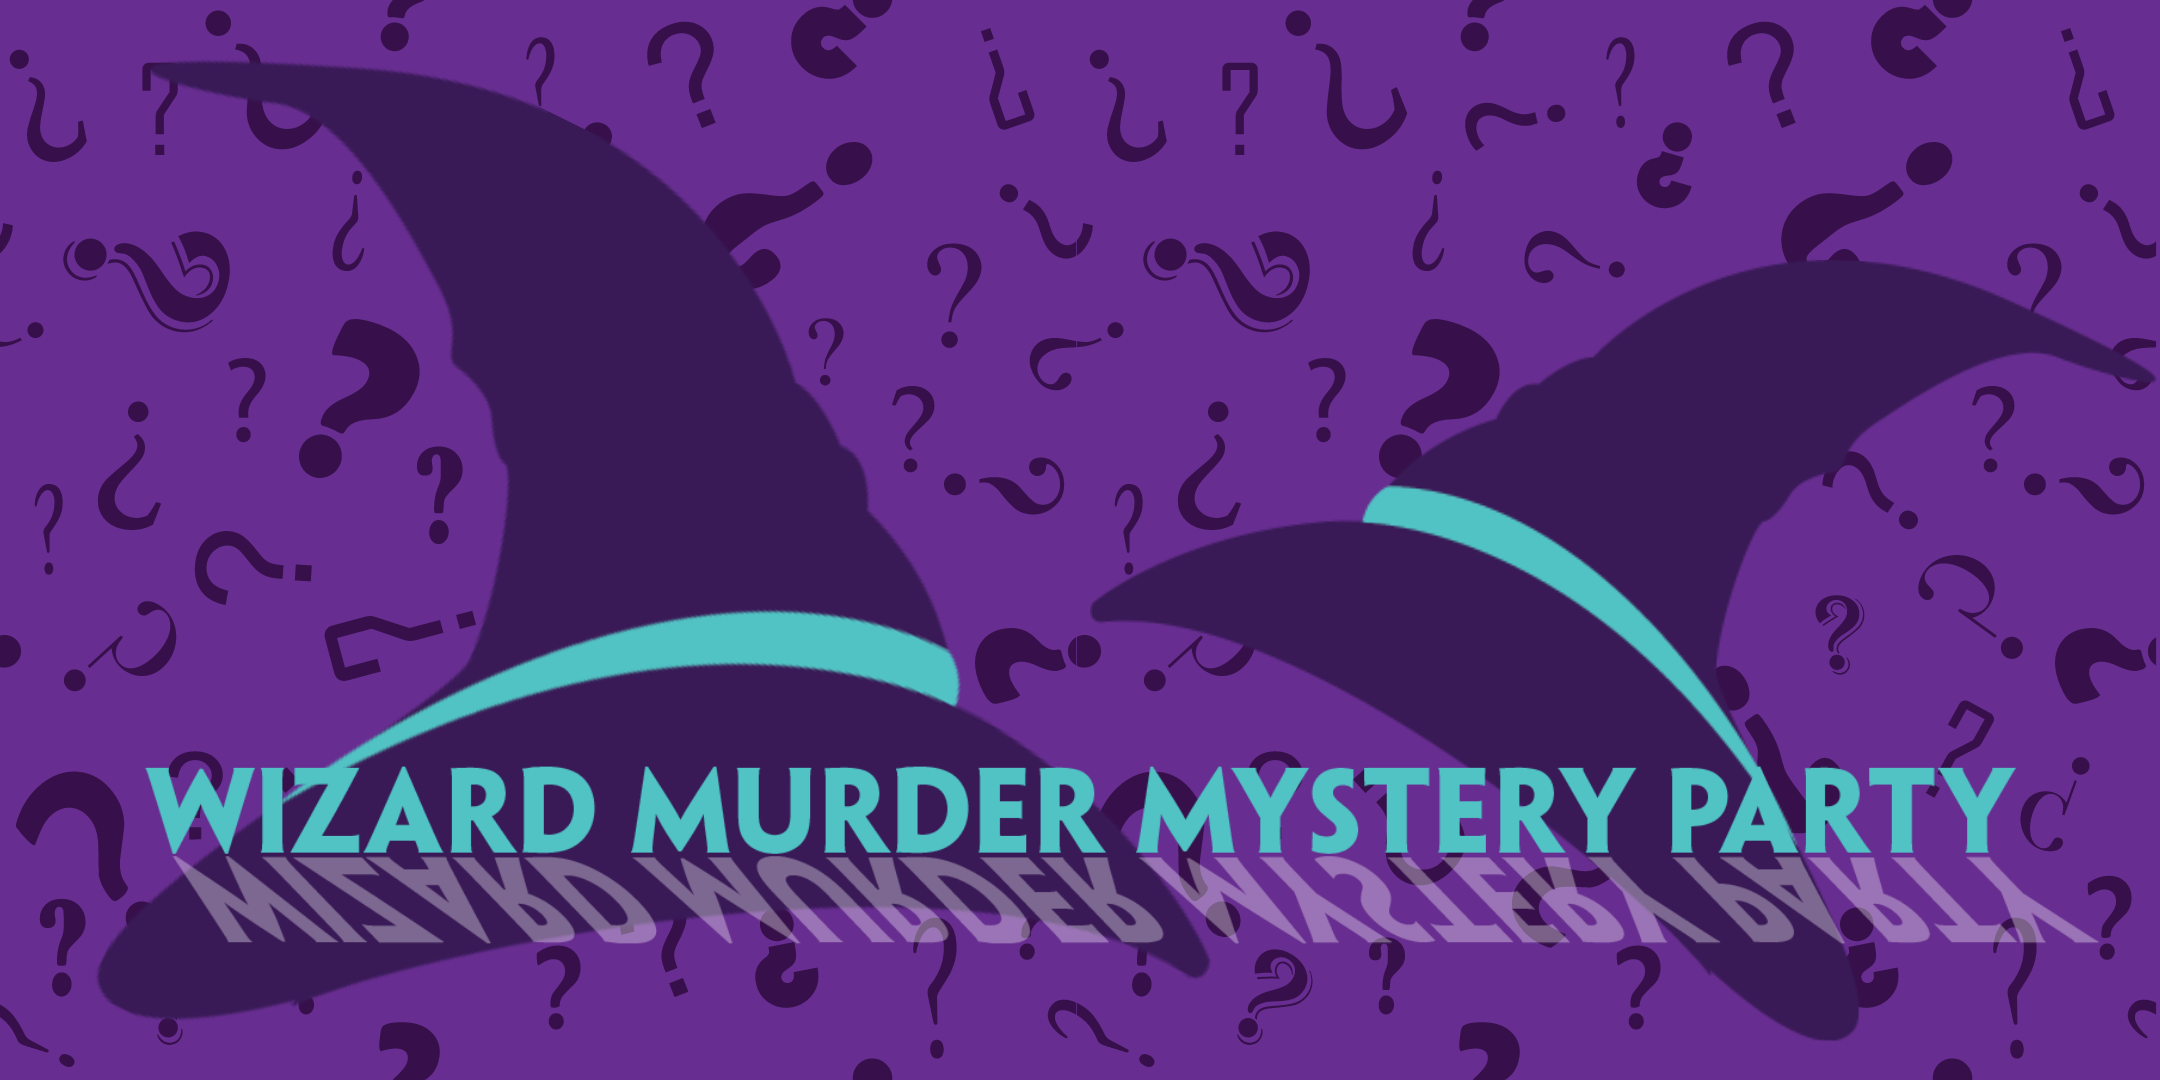 Wizard Murder Mystery Party image